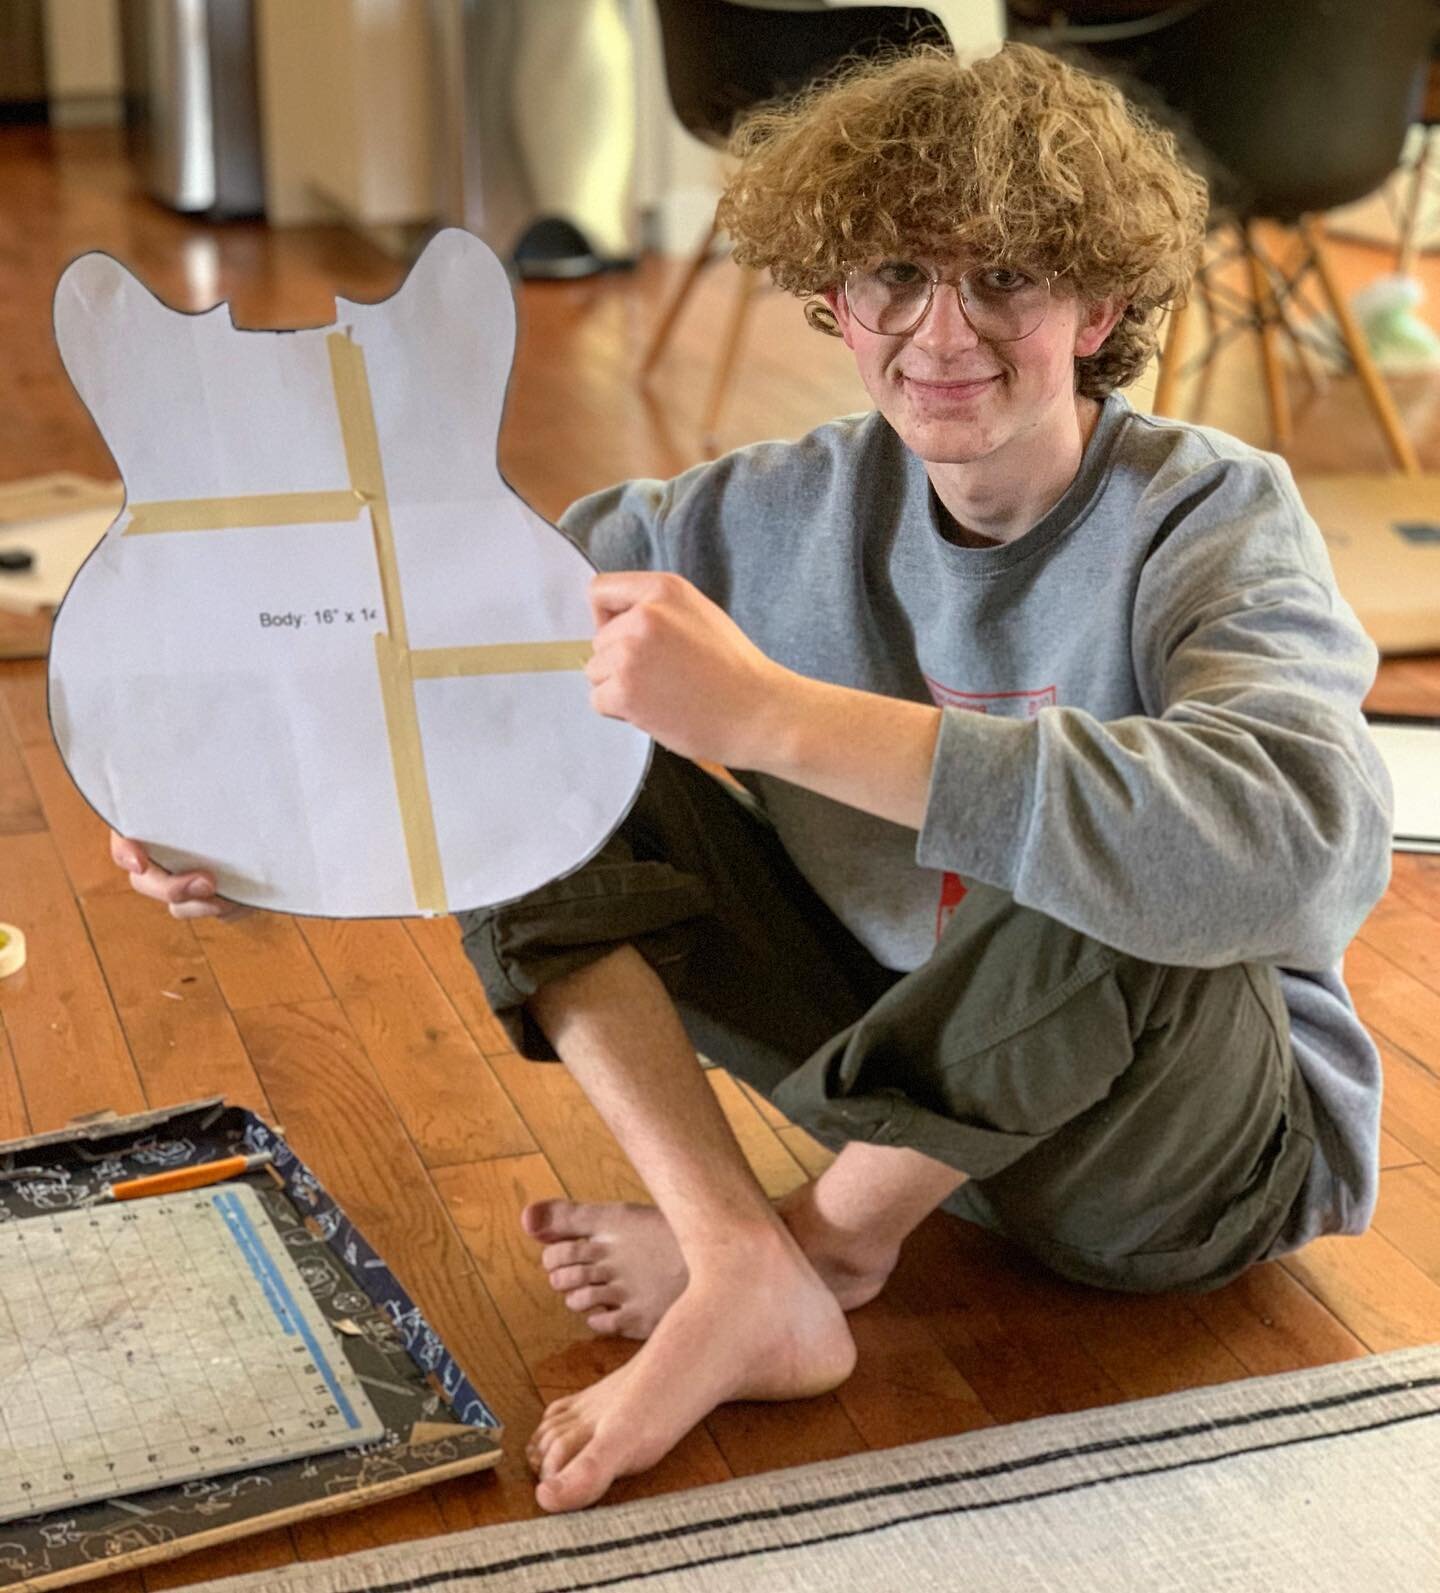 This guy has decided to make an electric guitar in shop class. What he&rsquo;s holding is one part of his cardboard prototype, which he&rsquo;ll use to pitch the project to his shop teacher. He is also researching Leo Fender&rsquo;s original wiring d